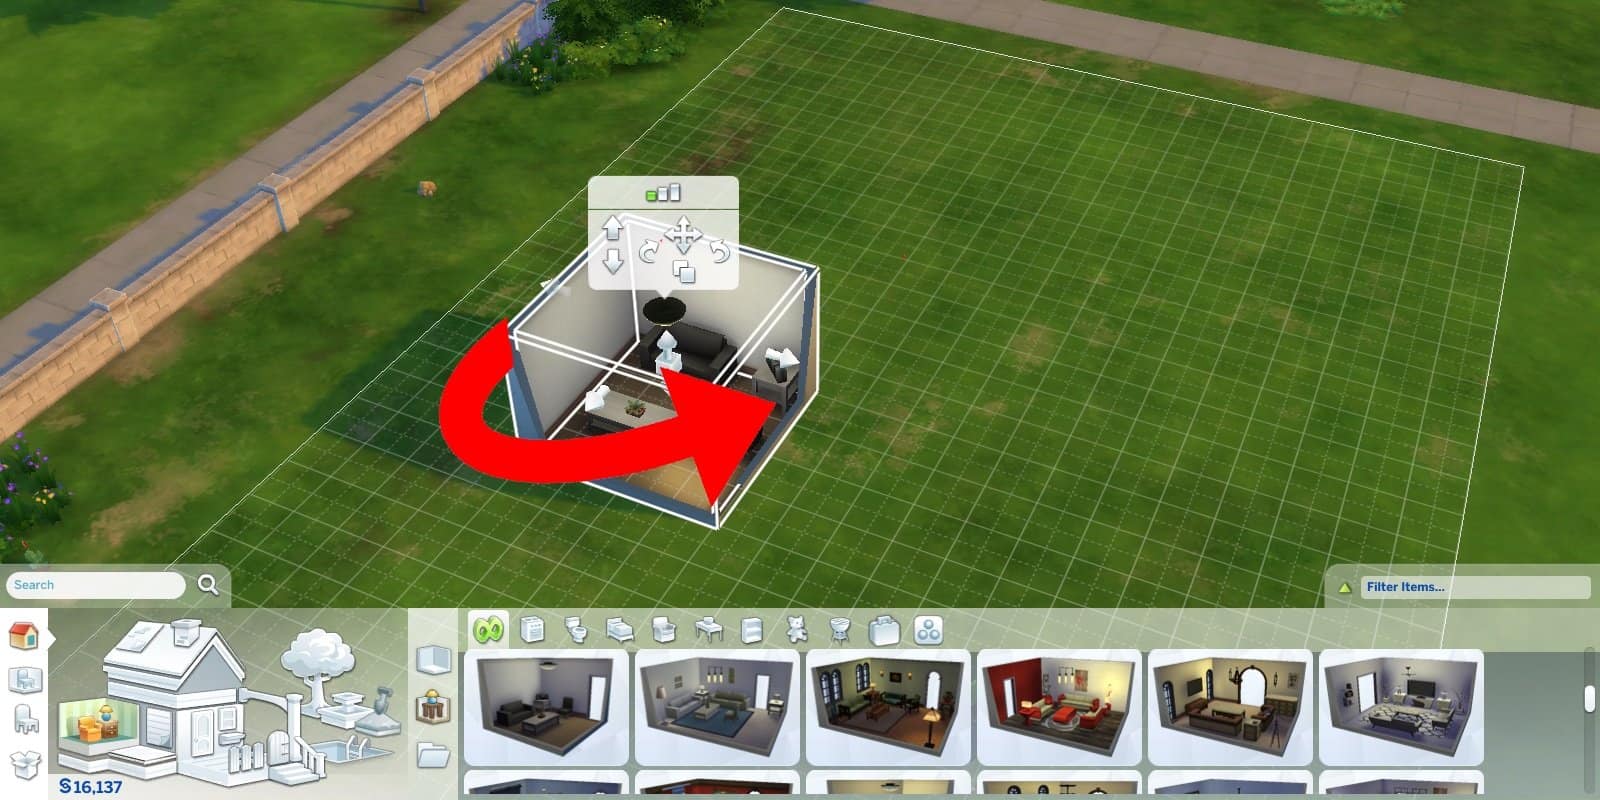 Rotating an object in The Sims 4.